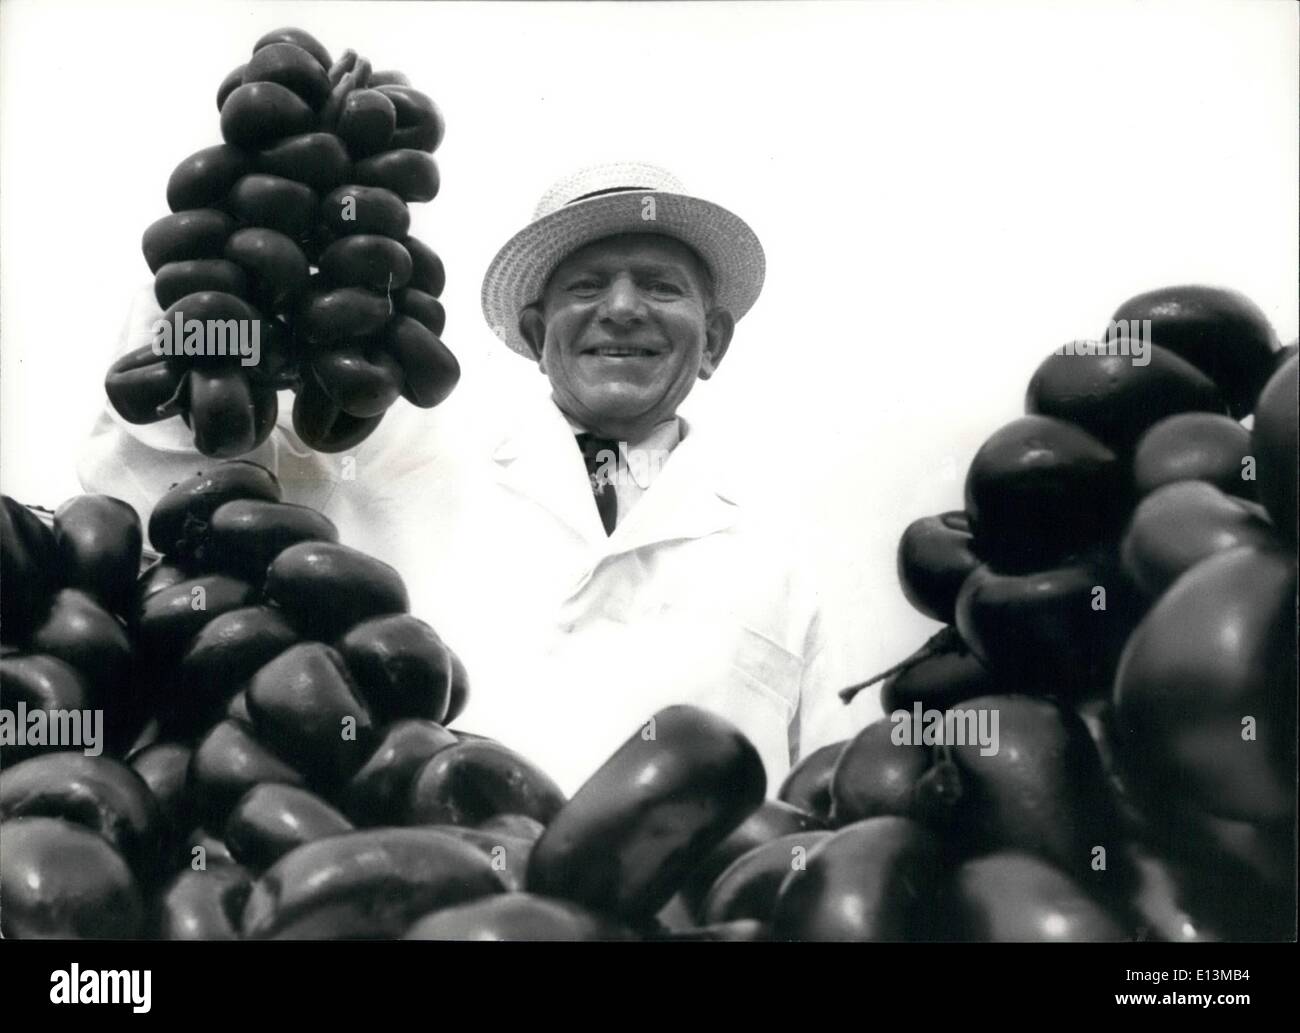 Mar. 02, 2012 - Albert Hirst aged 67 with the latest batch of his world famous Black Puddings, at this factory in Queen's Road, Stock Photo